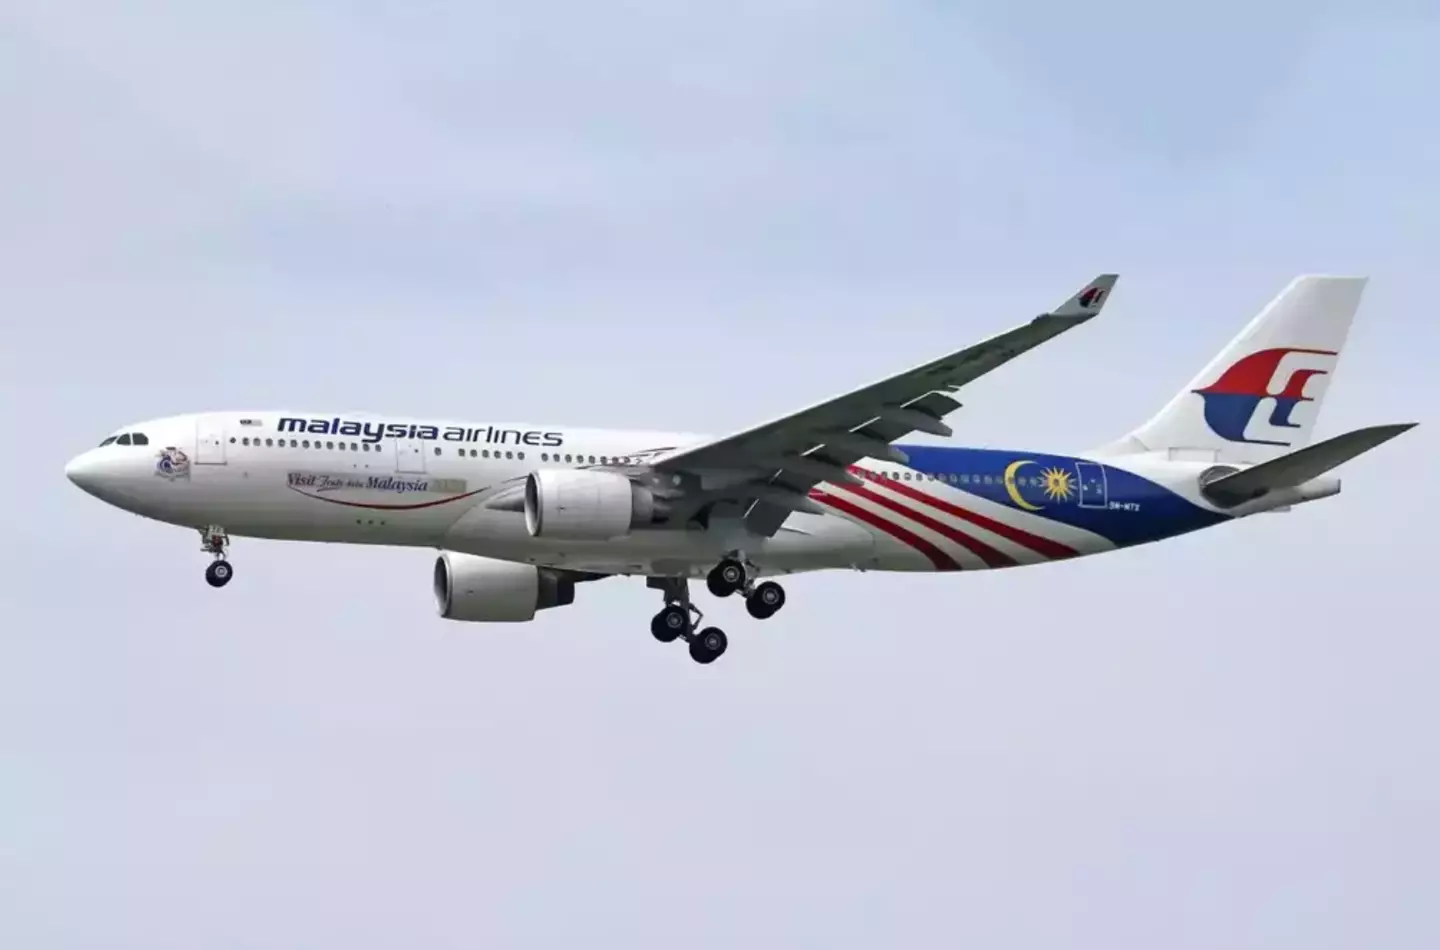 A tech expert claimed he has 'found' the missing MH370 Malaysian Airlines on Google Maps.